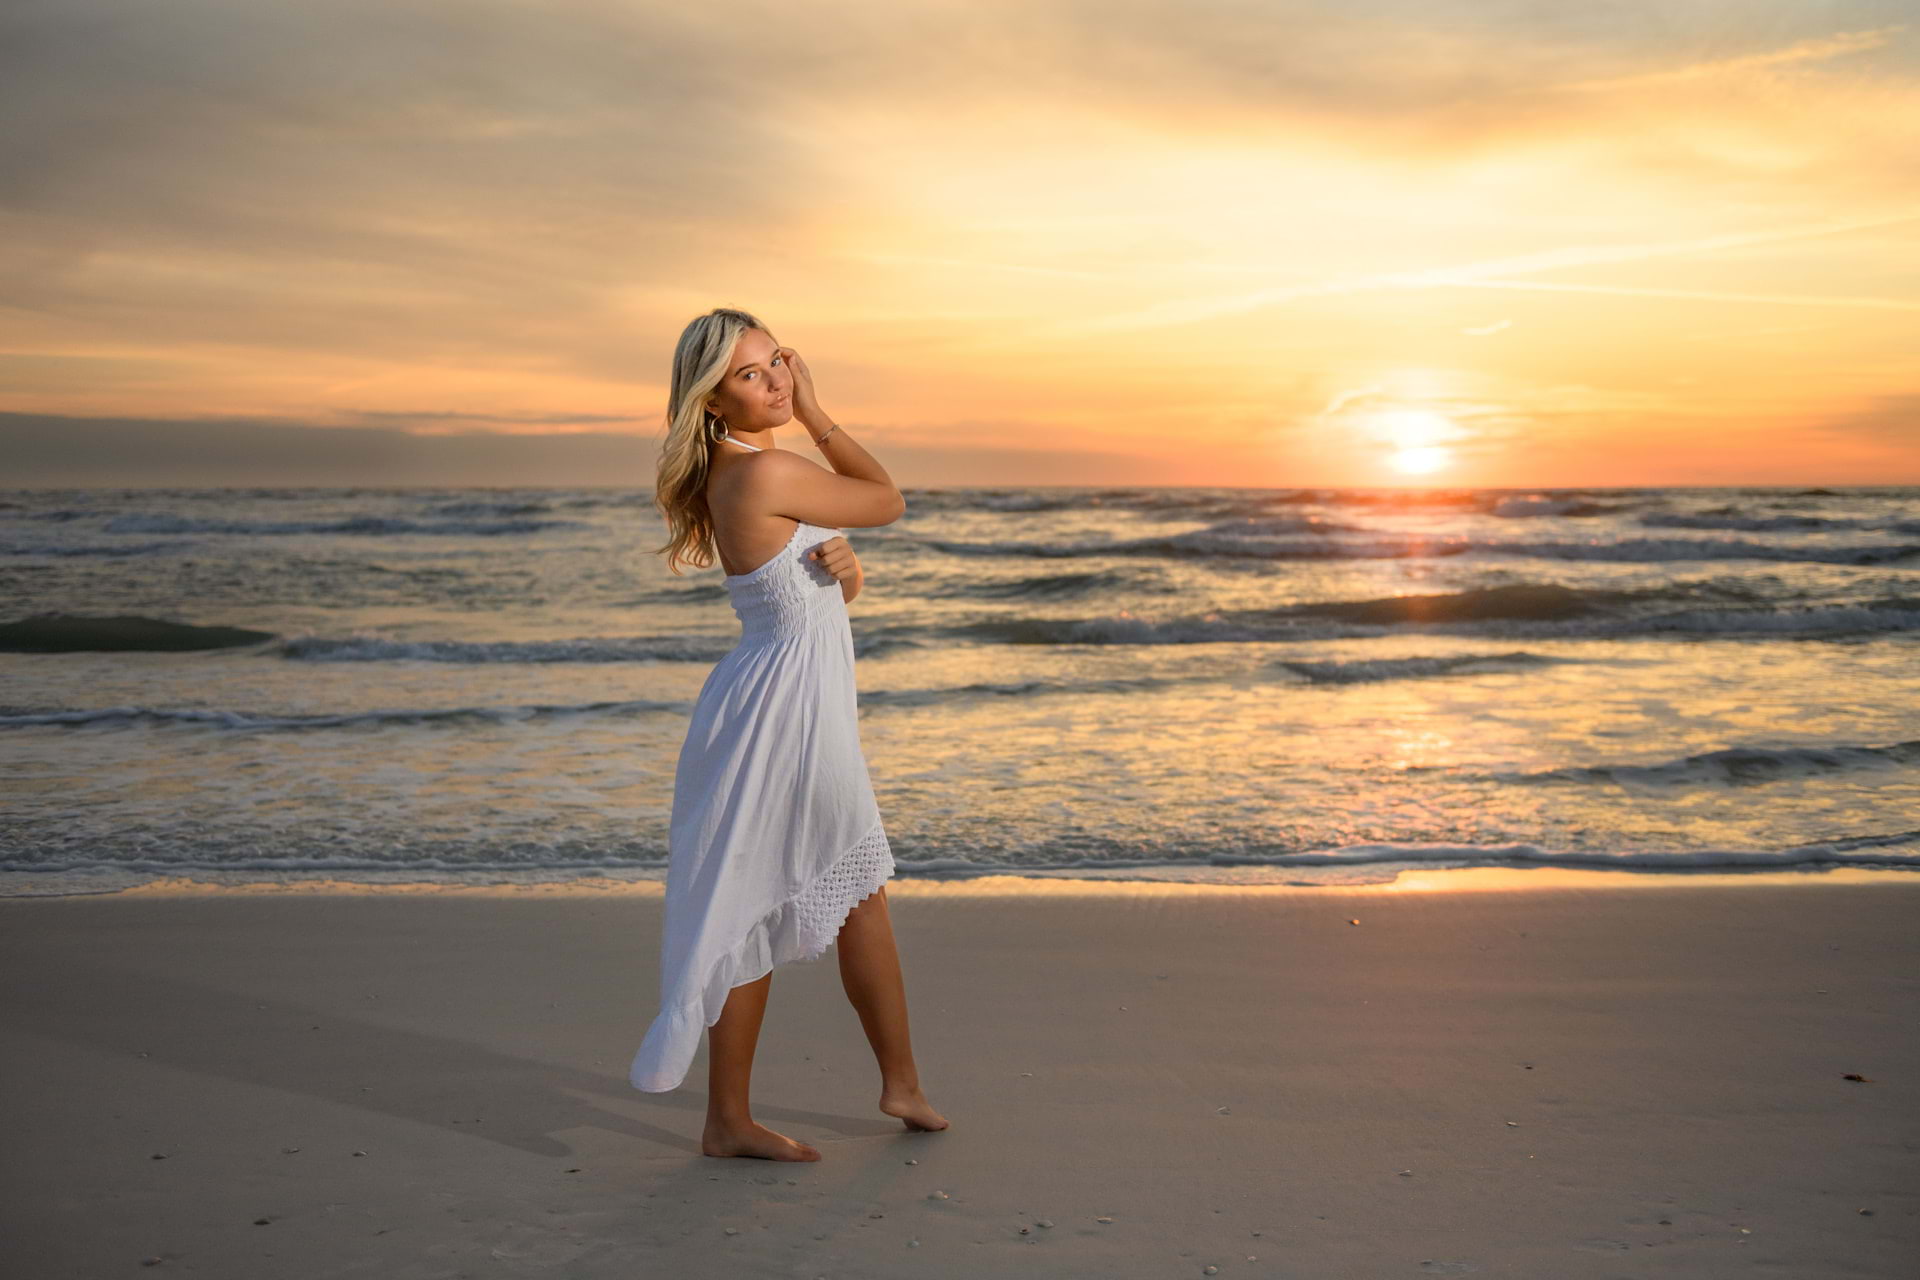 Photo of a young girl on a beach during sunset